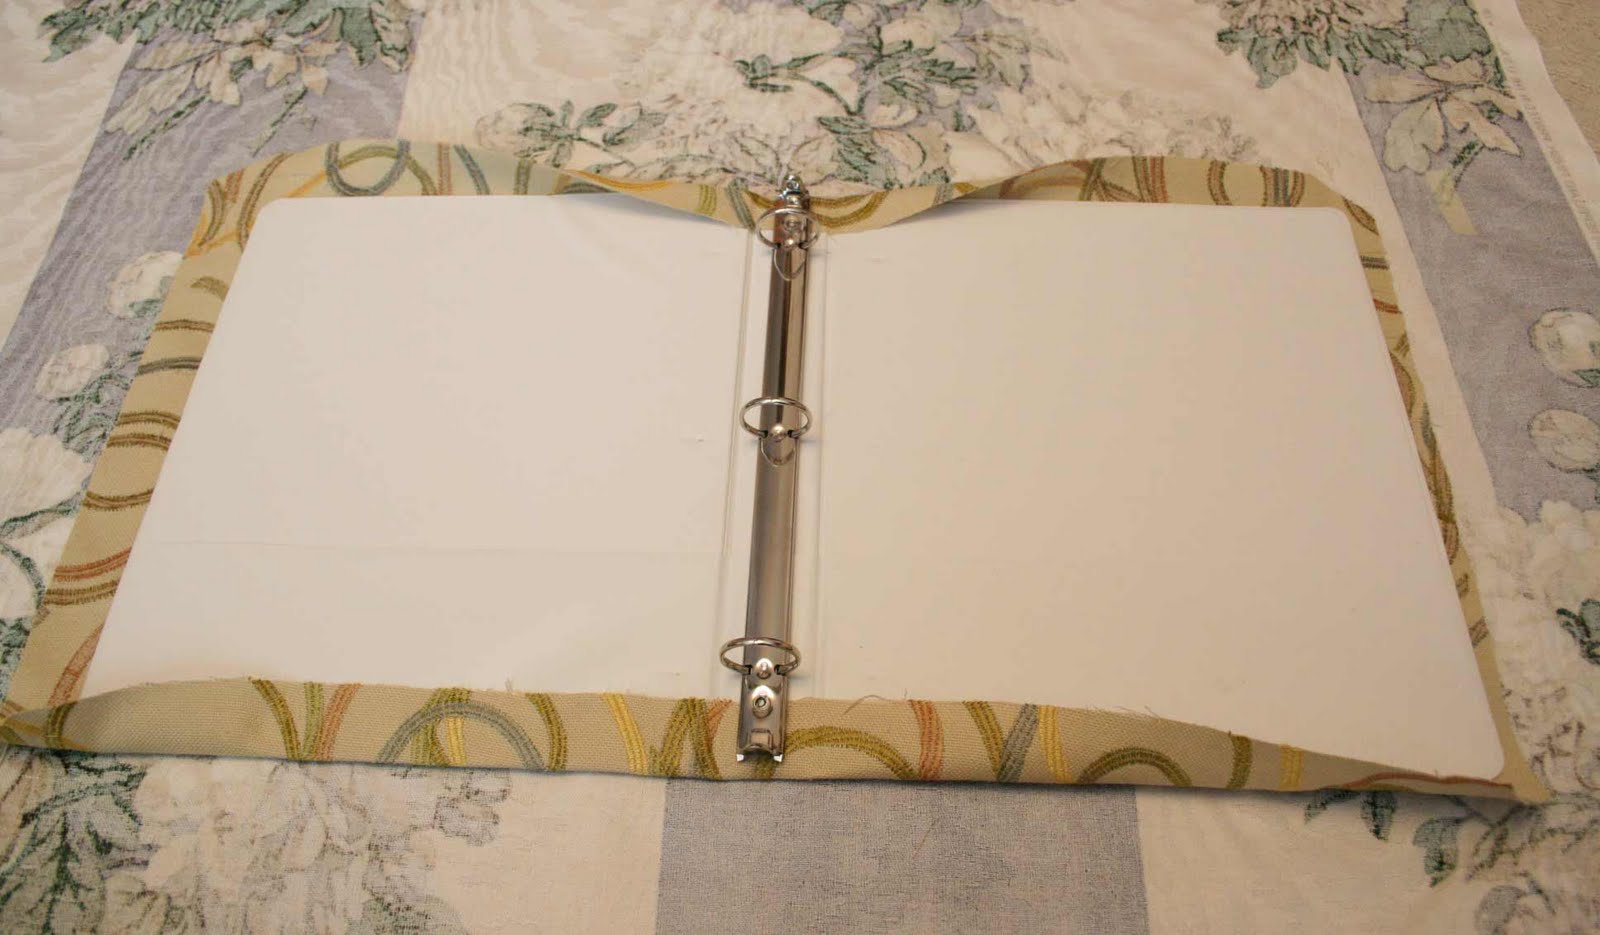 How to cover a binder with fabric and give it a romantic look